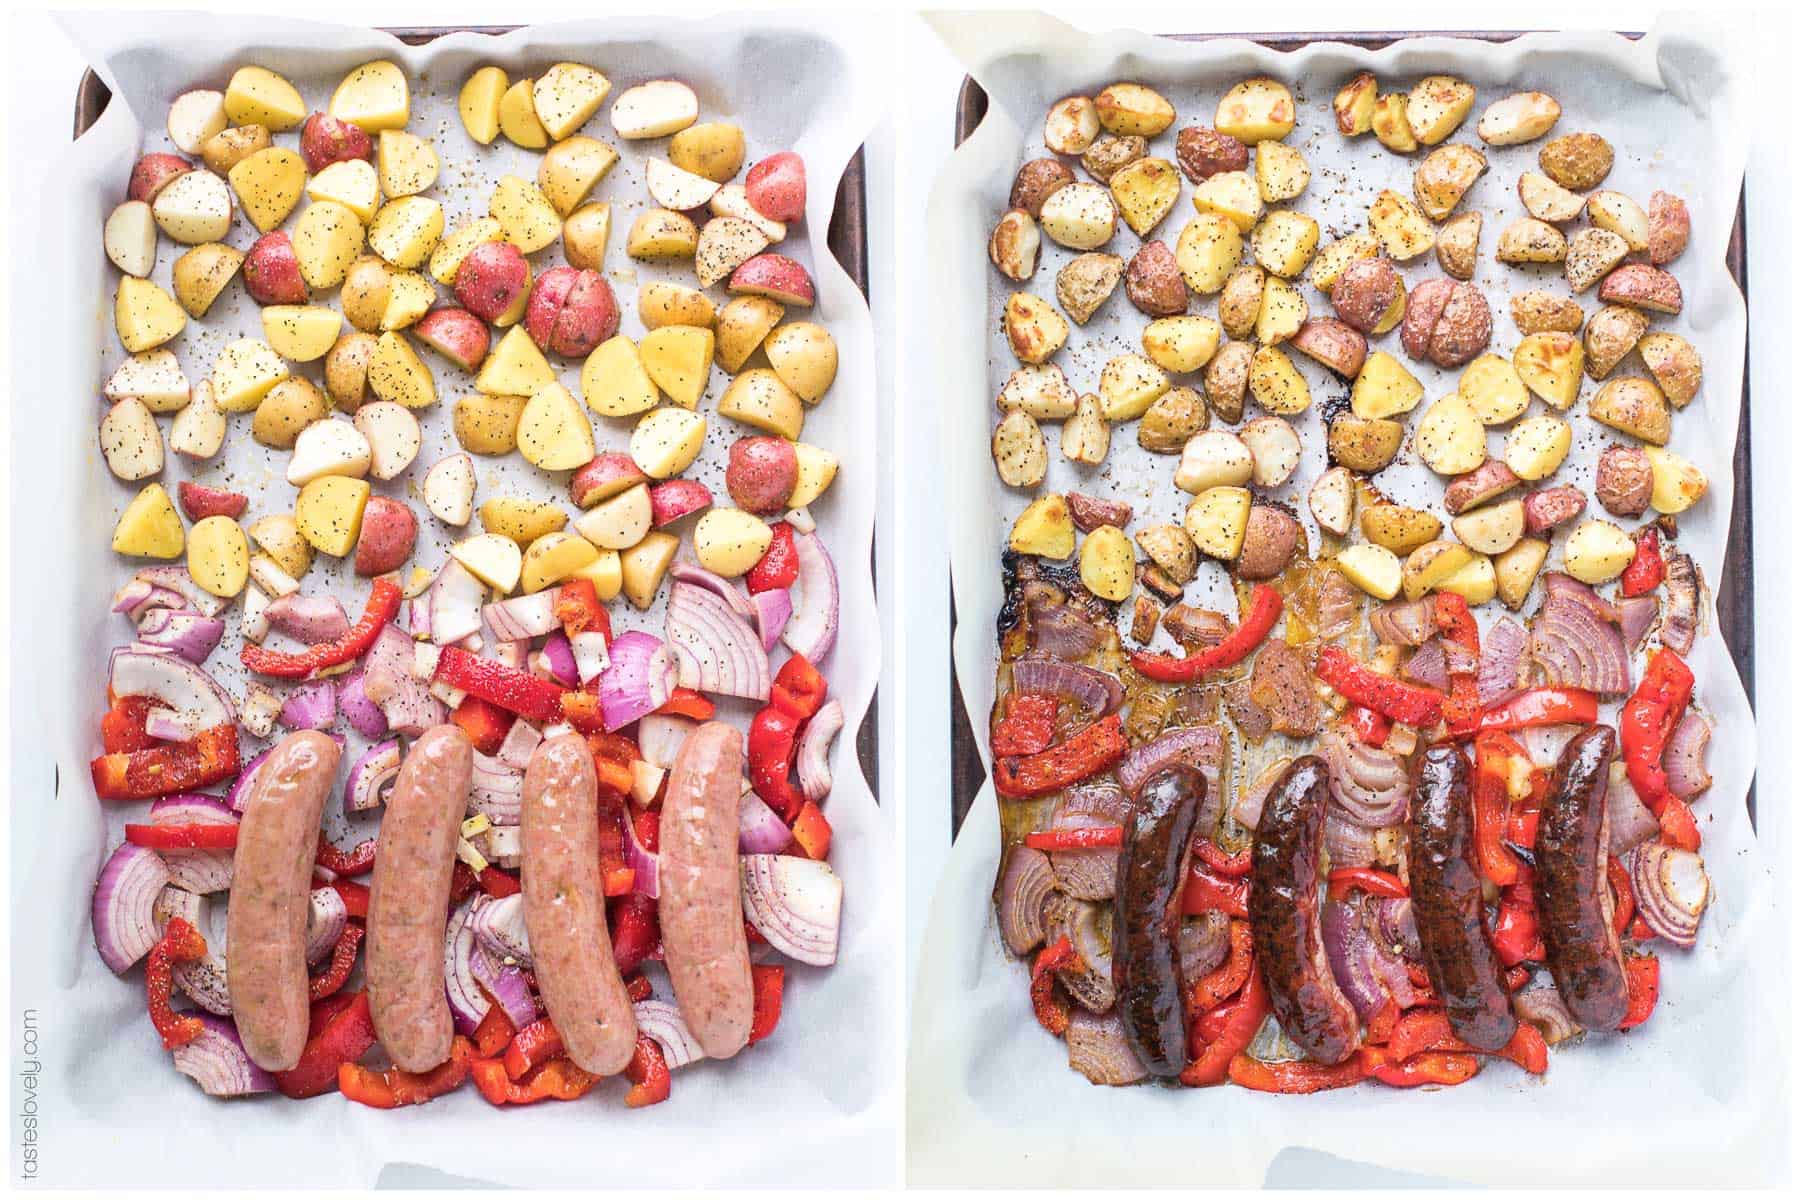 Paleo + Whole30 Sheet Pan Sausage, Bell Pepper and Potato Roast - a super quick and healthy breakfast or dinner recipe! Just 10 minutes of prep, and the oven does the rest of the work for you. #paleo #whole30 #glutenfree #grainfree #dairyfree #sugarfree #keto #cleaneating #realfood